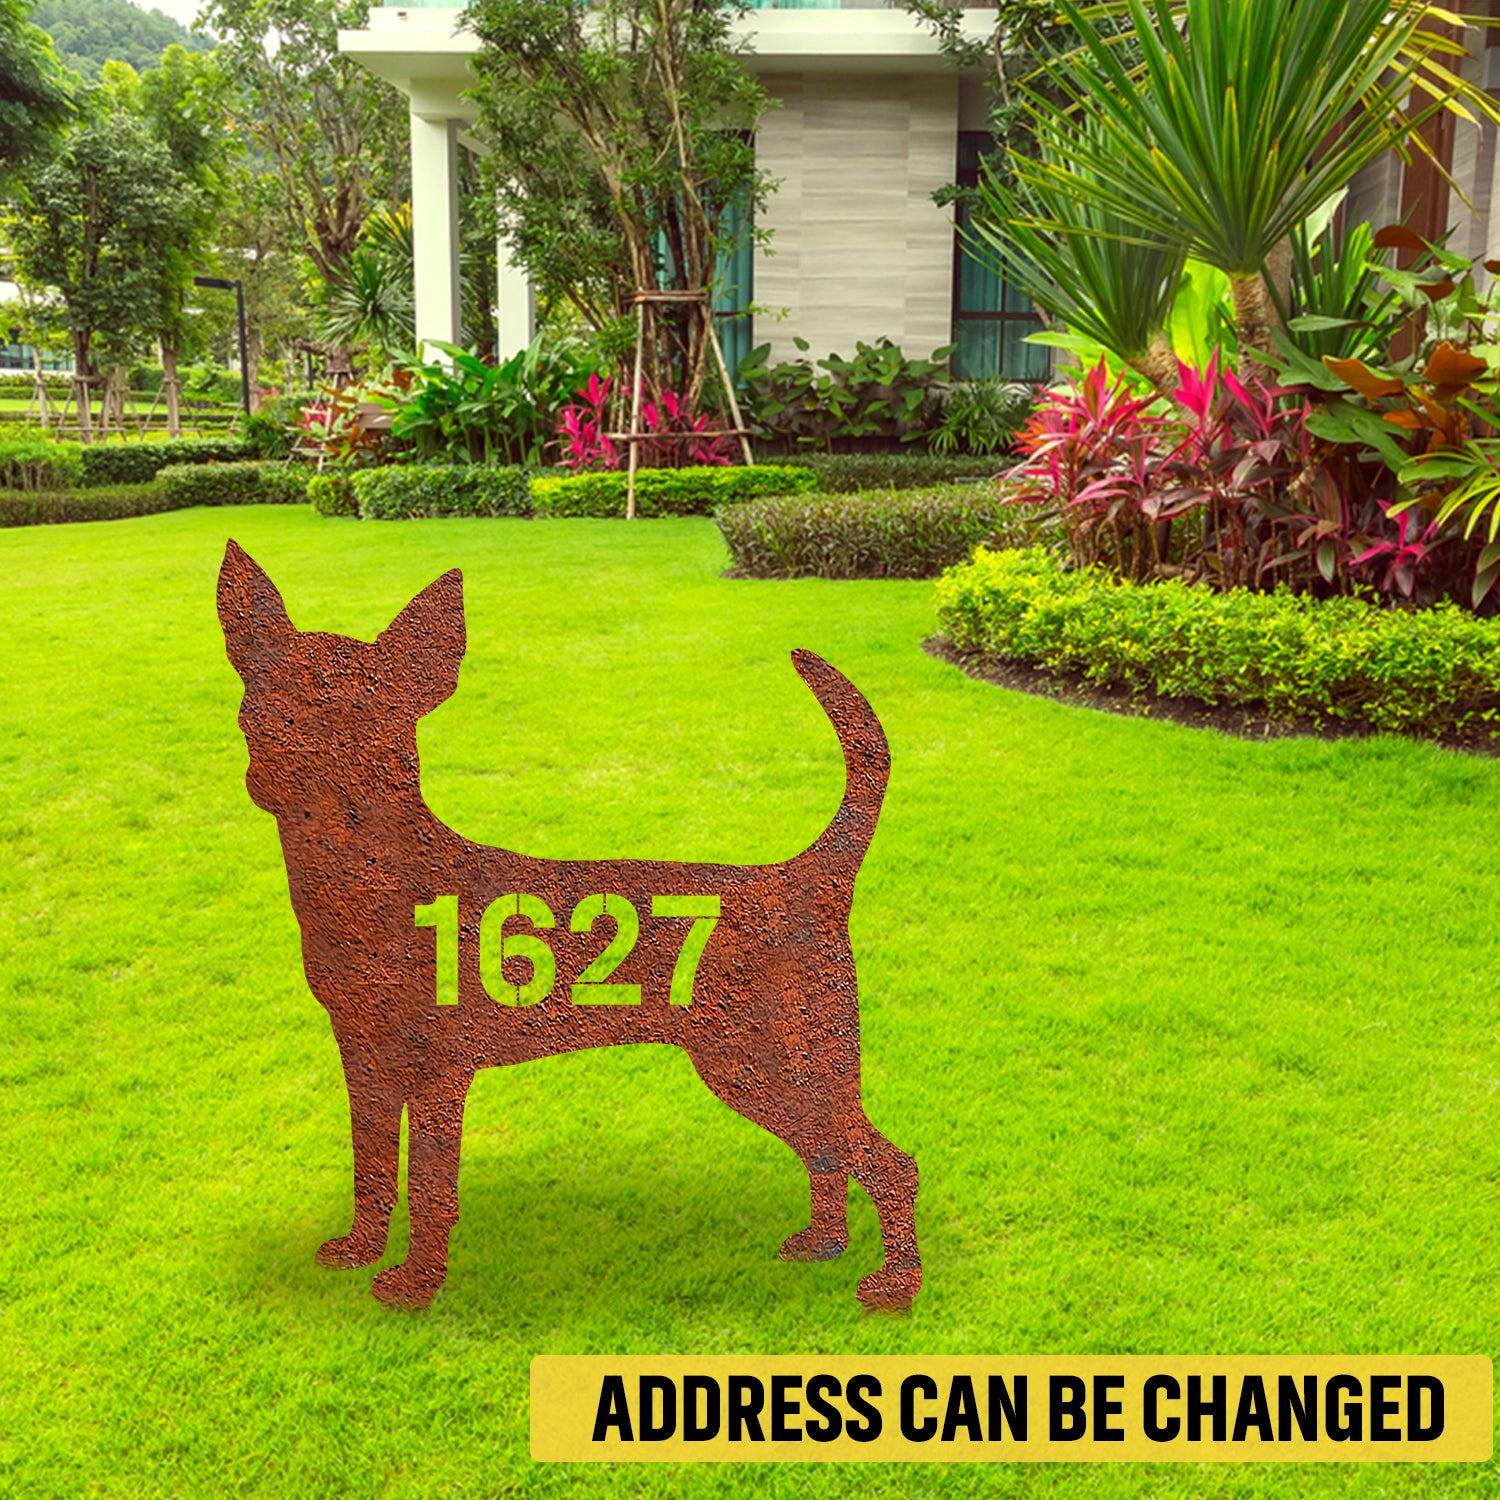 Personalized Address Chihuahua Dog Rusted Metal Garden Decoration, Funny Chihuahua Puppy Stake